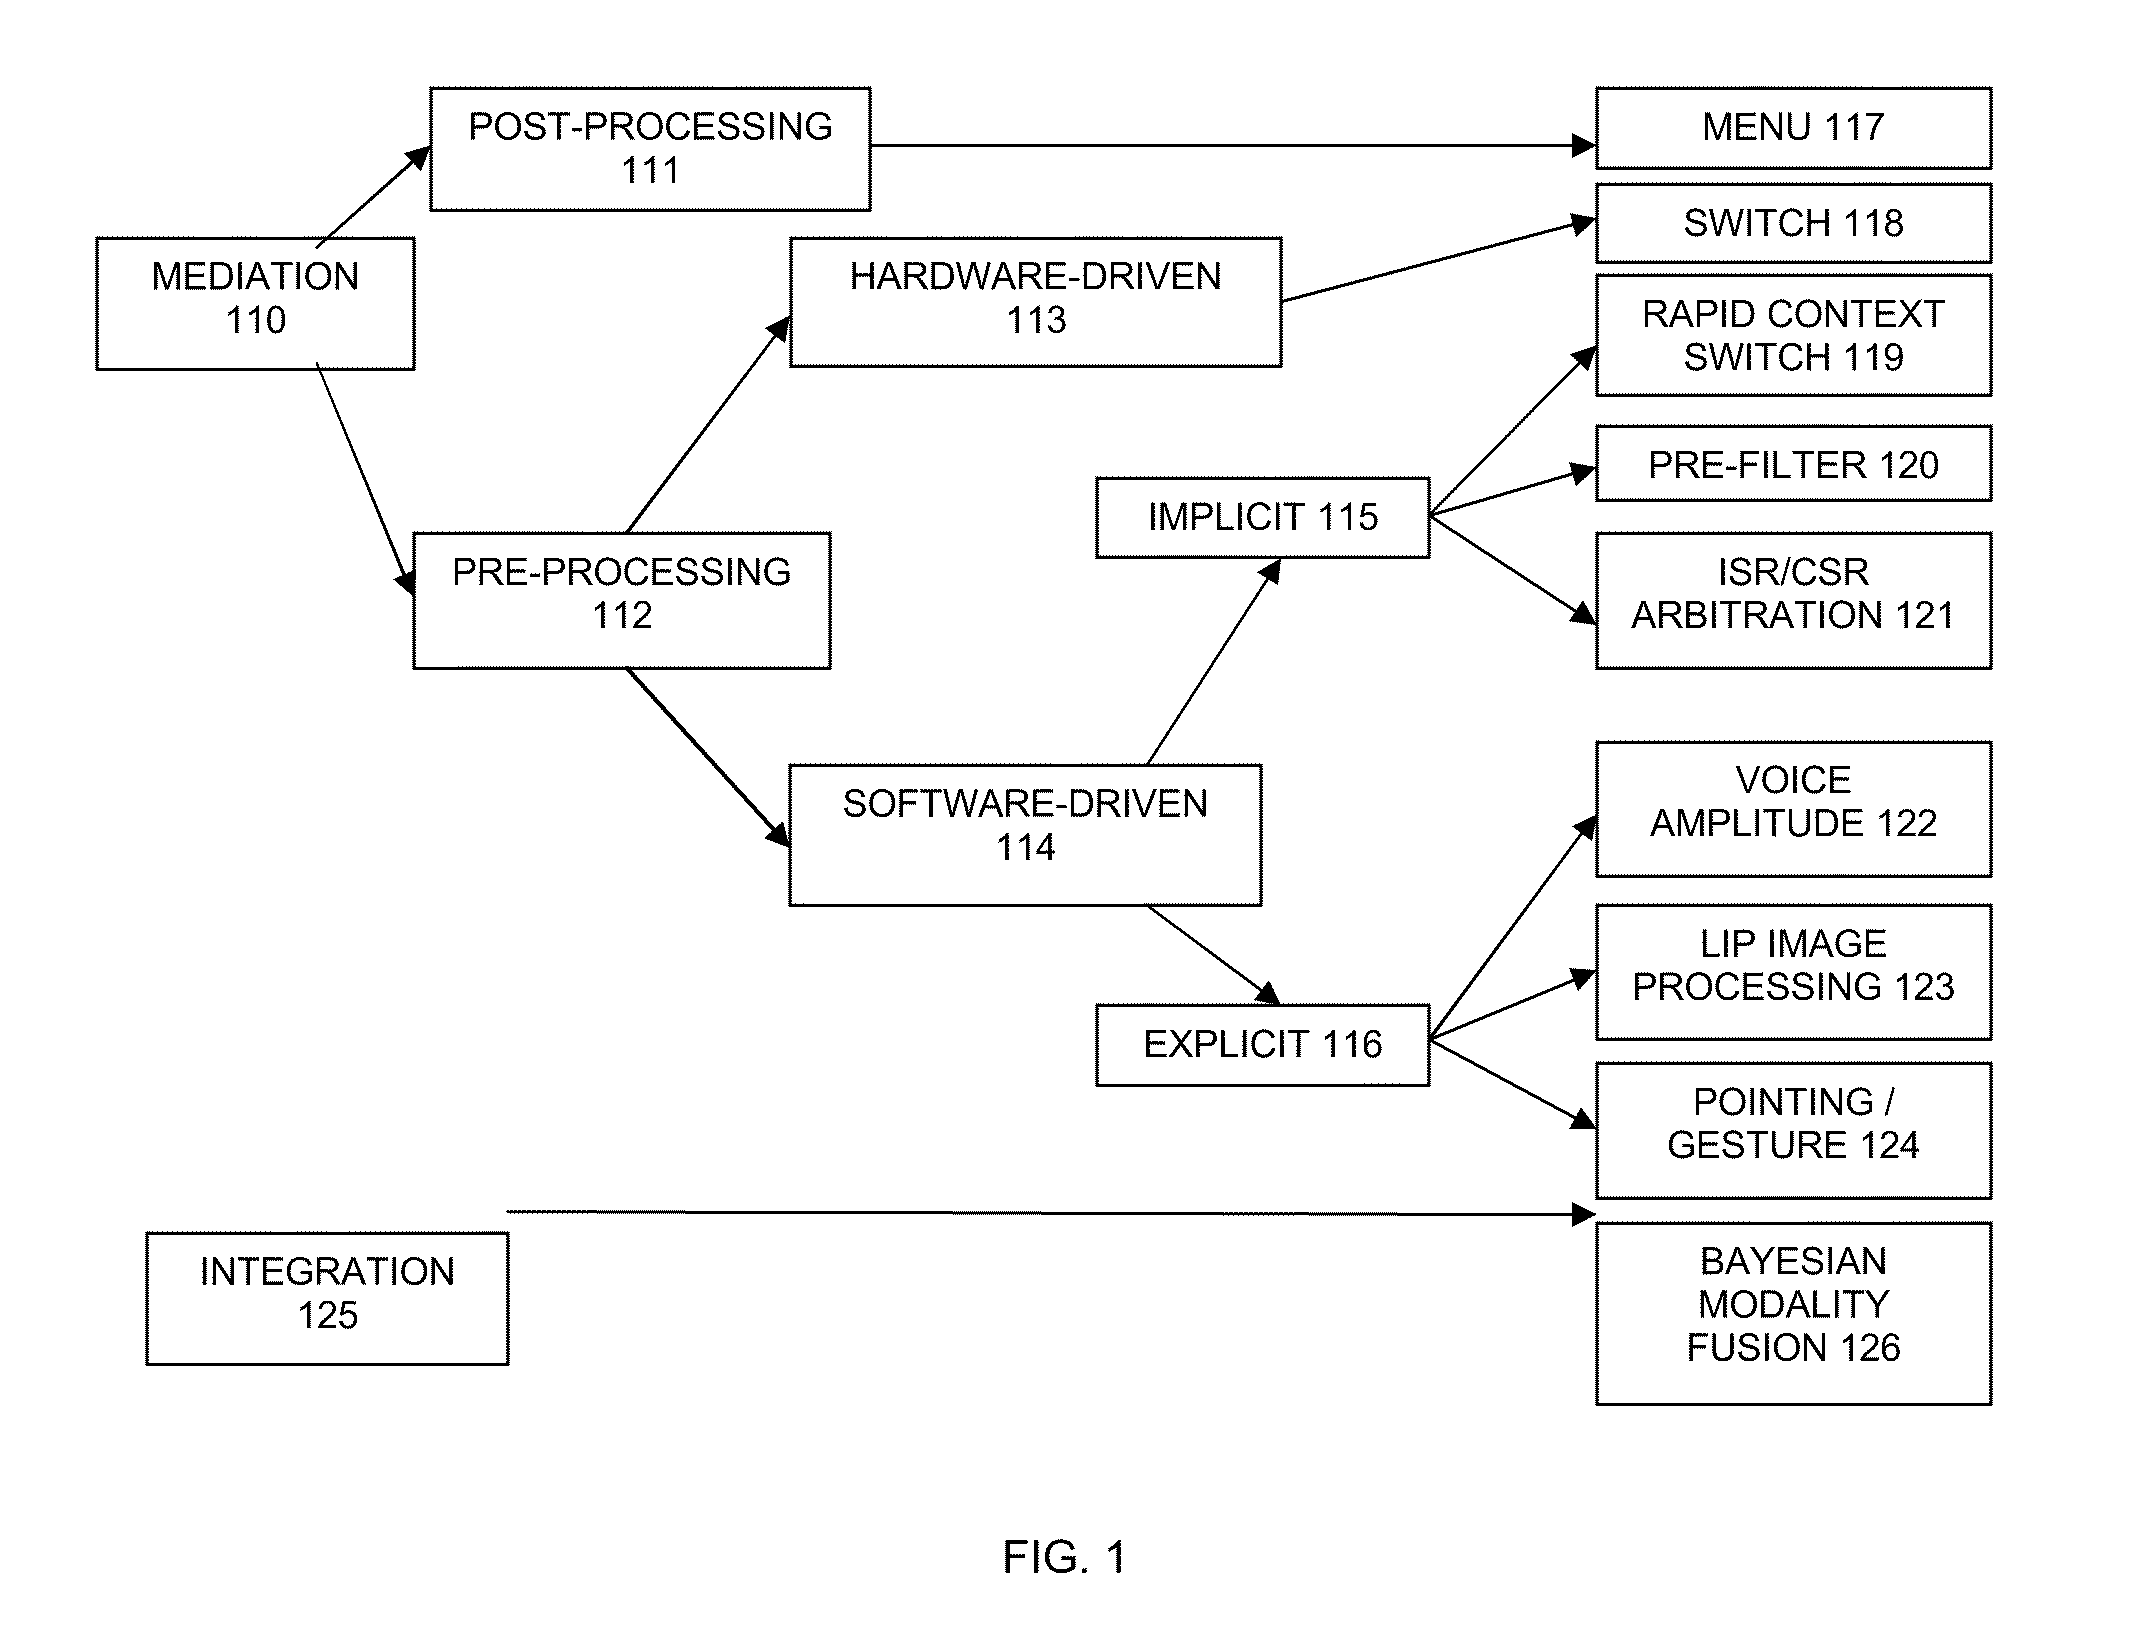 Multimodal unification of articulation for device interfacing